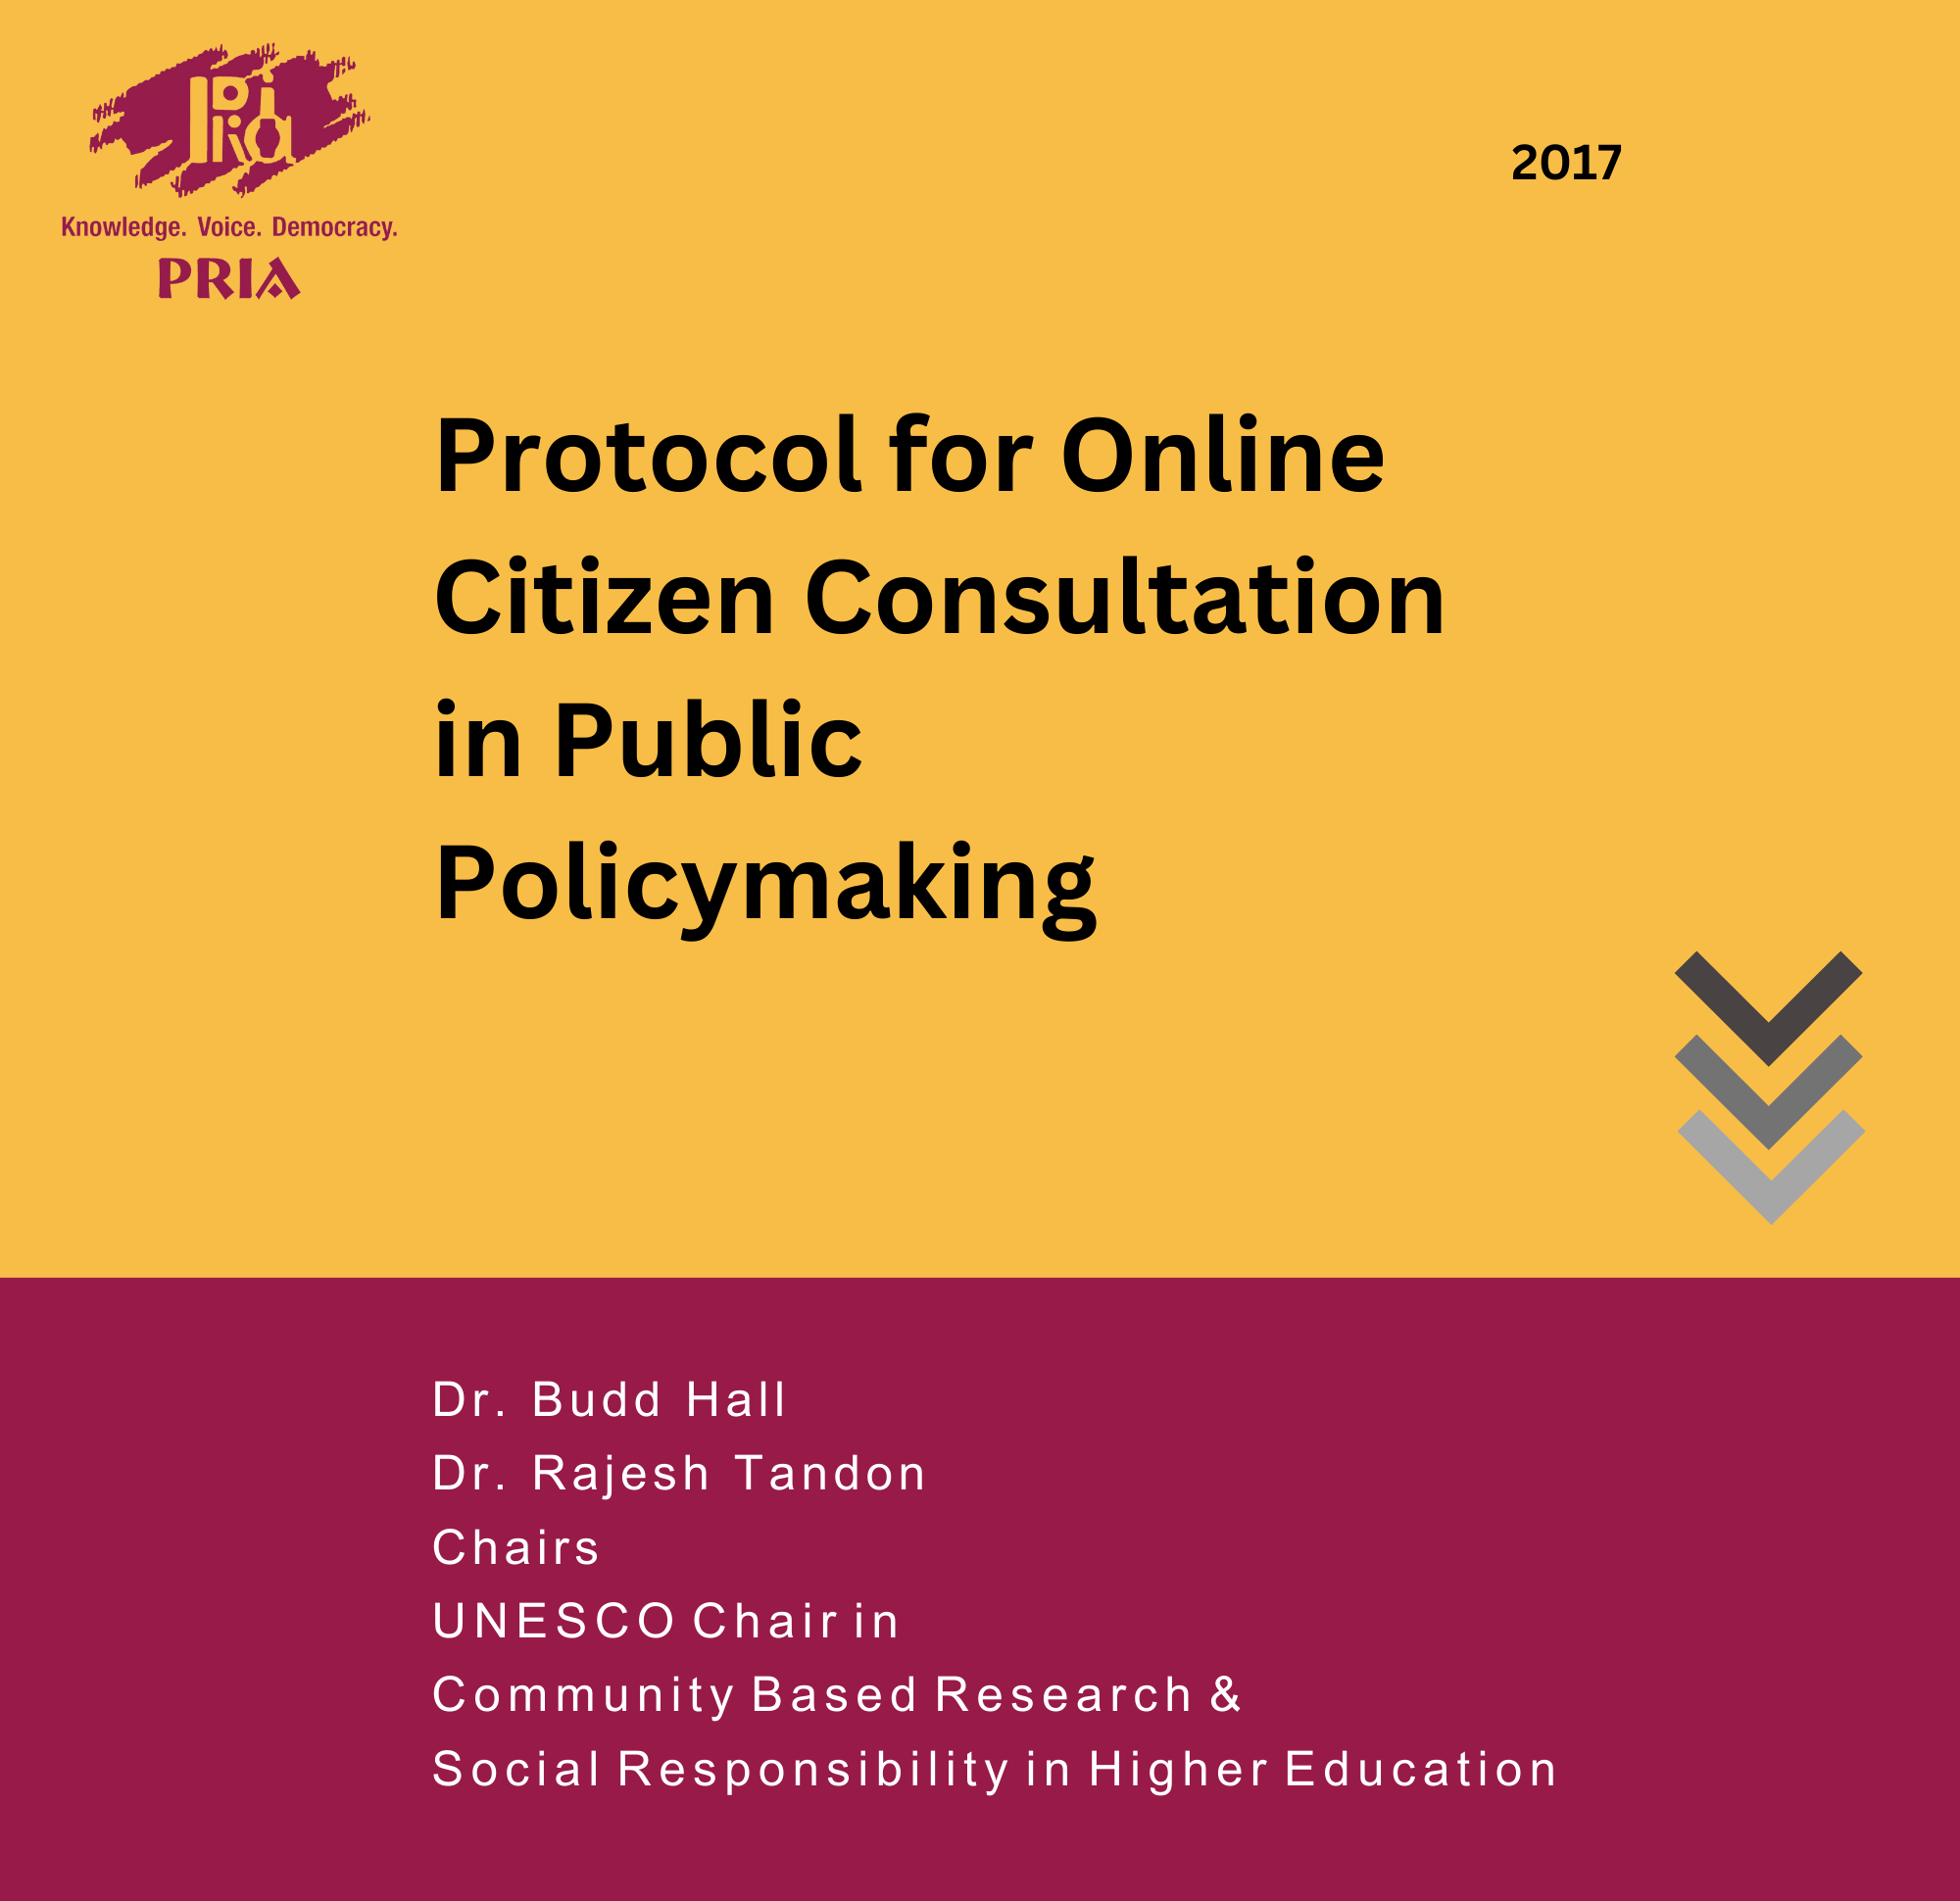 Protocol for Online Citizen Consultations in Public Policymaking